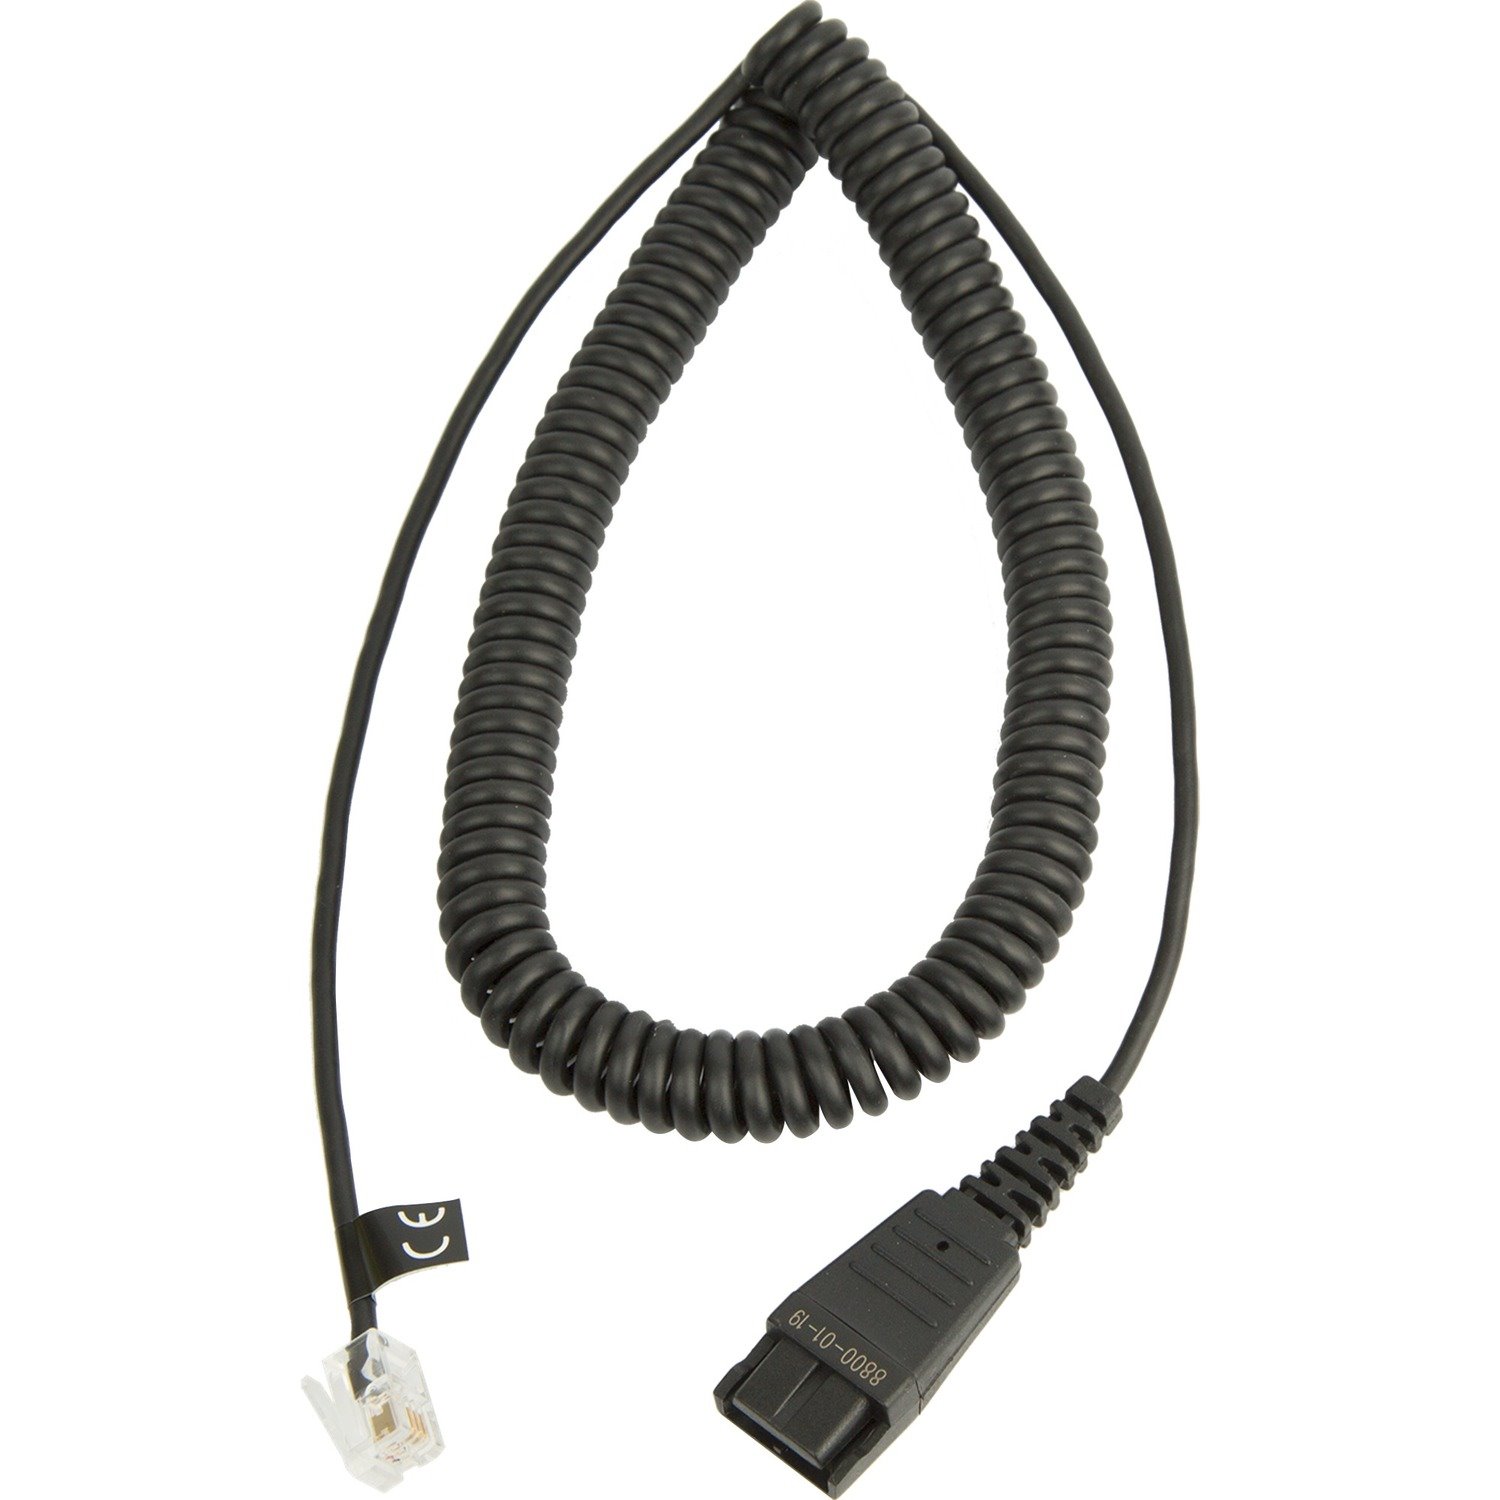 Jabra 8800-01-19 Coiled Phone Audio Cable Adapter